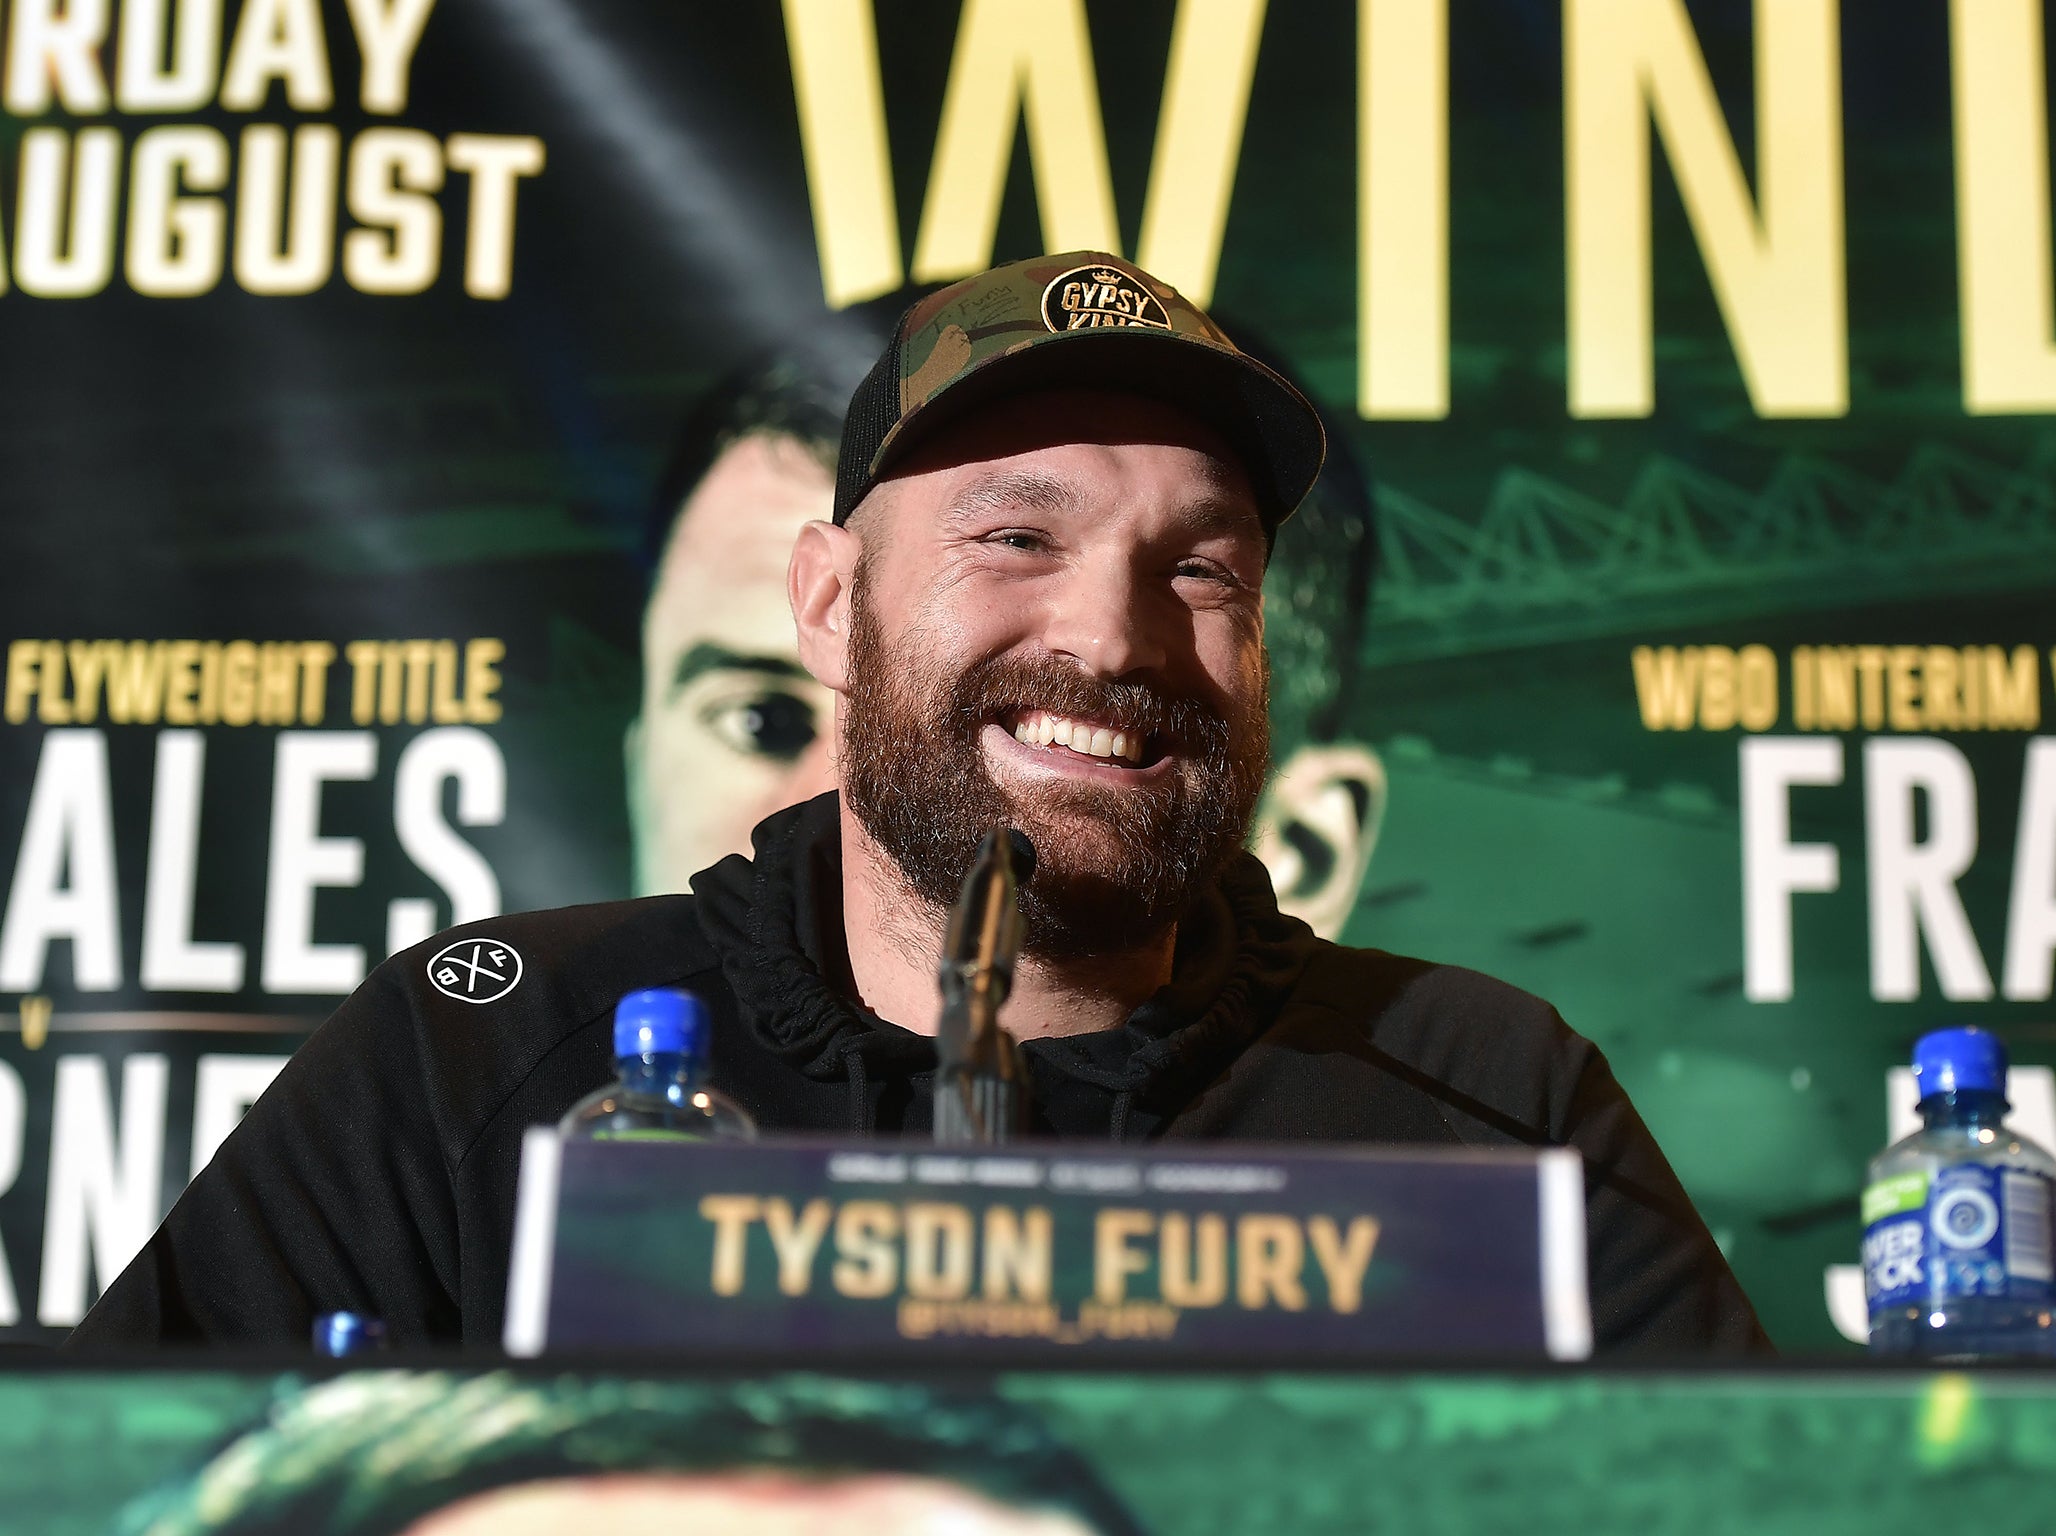 This is the second fight of Tyson Fury's comeback